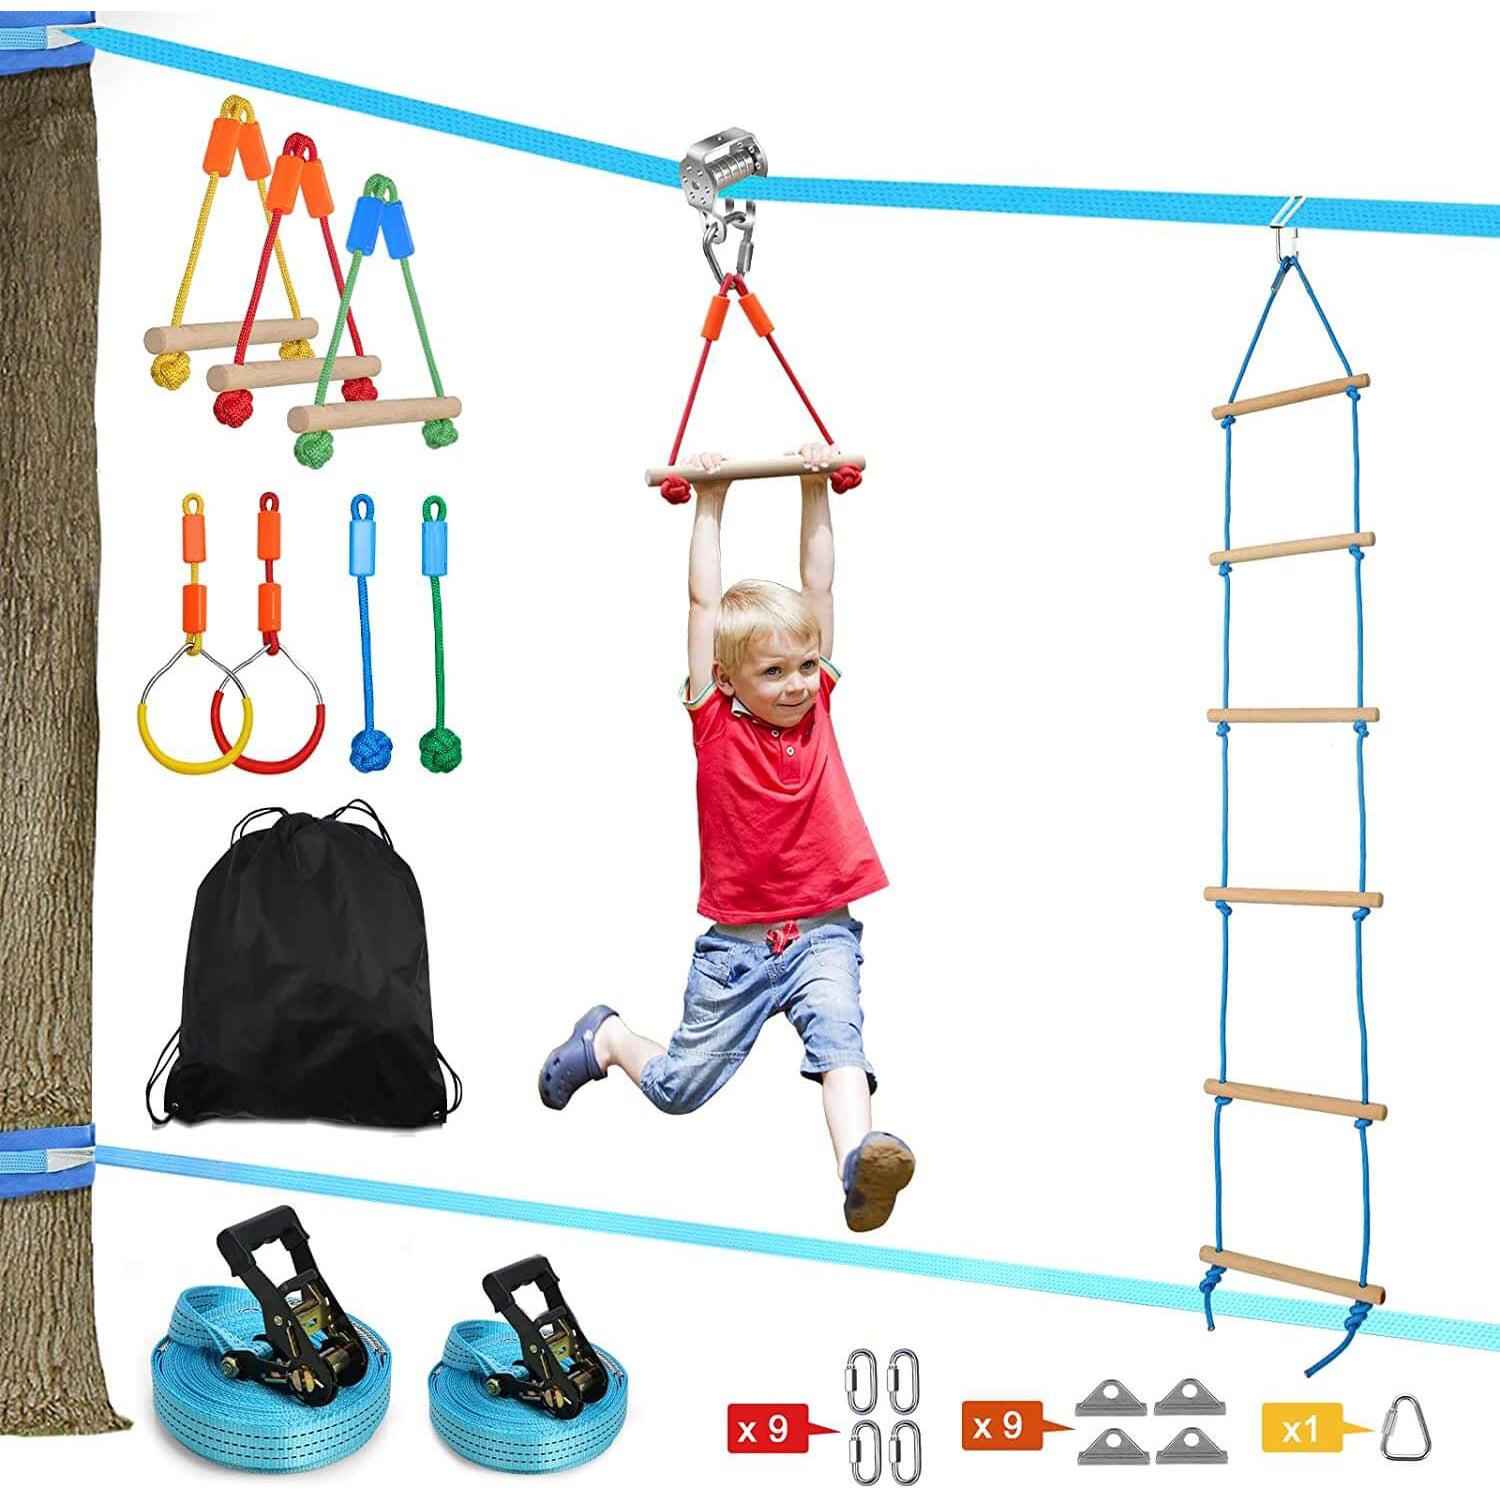 Ninja Warrior Obstacle Course 2X50ft for Kids with Pulley